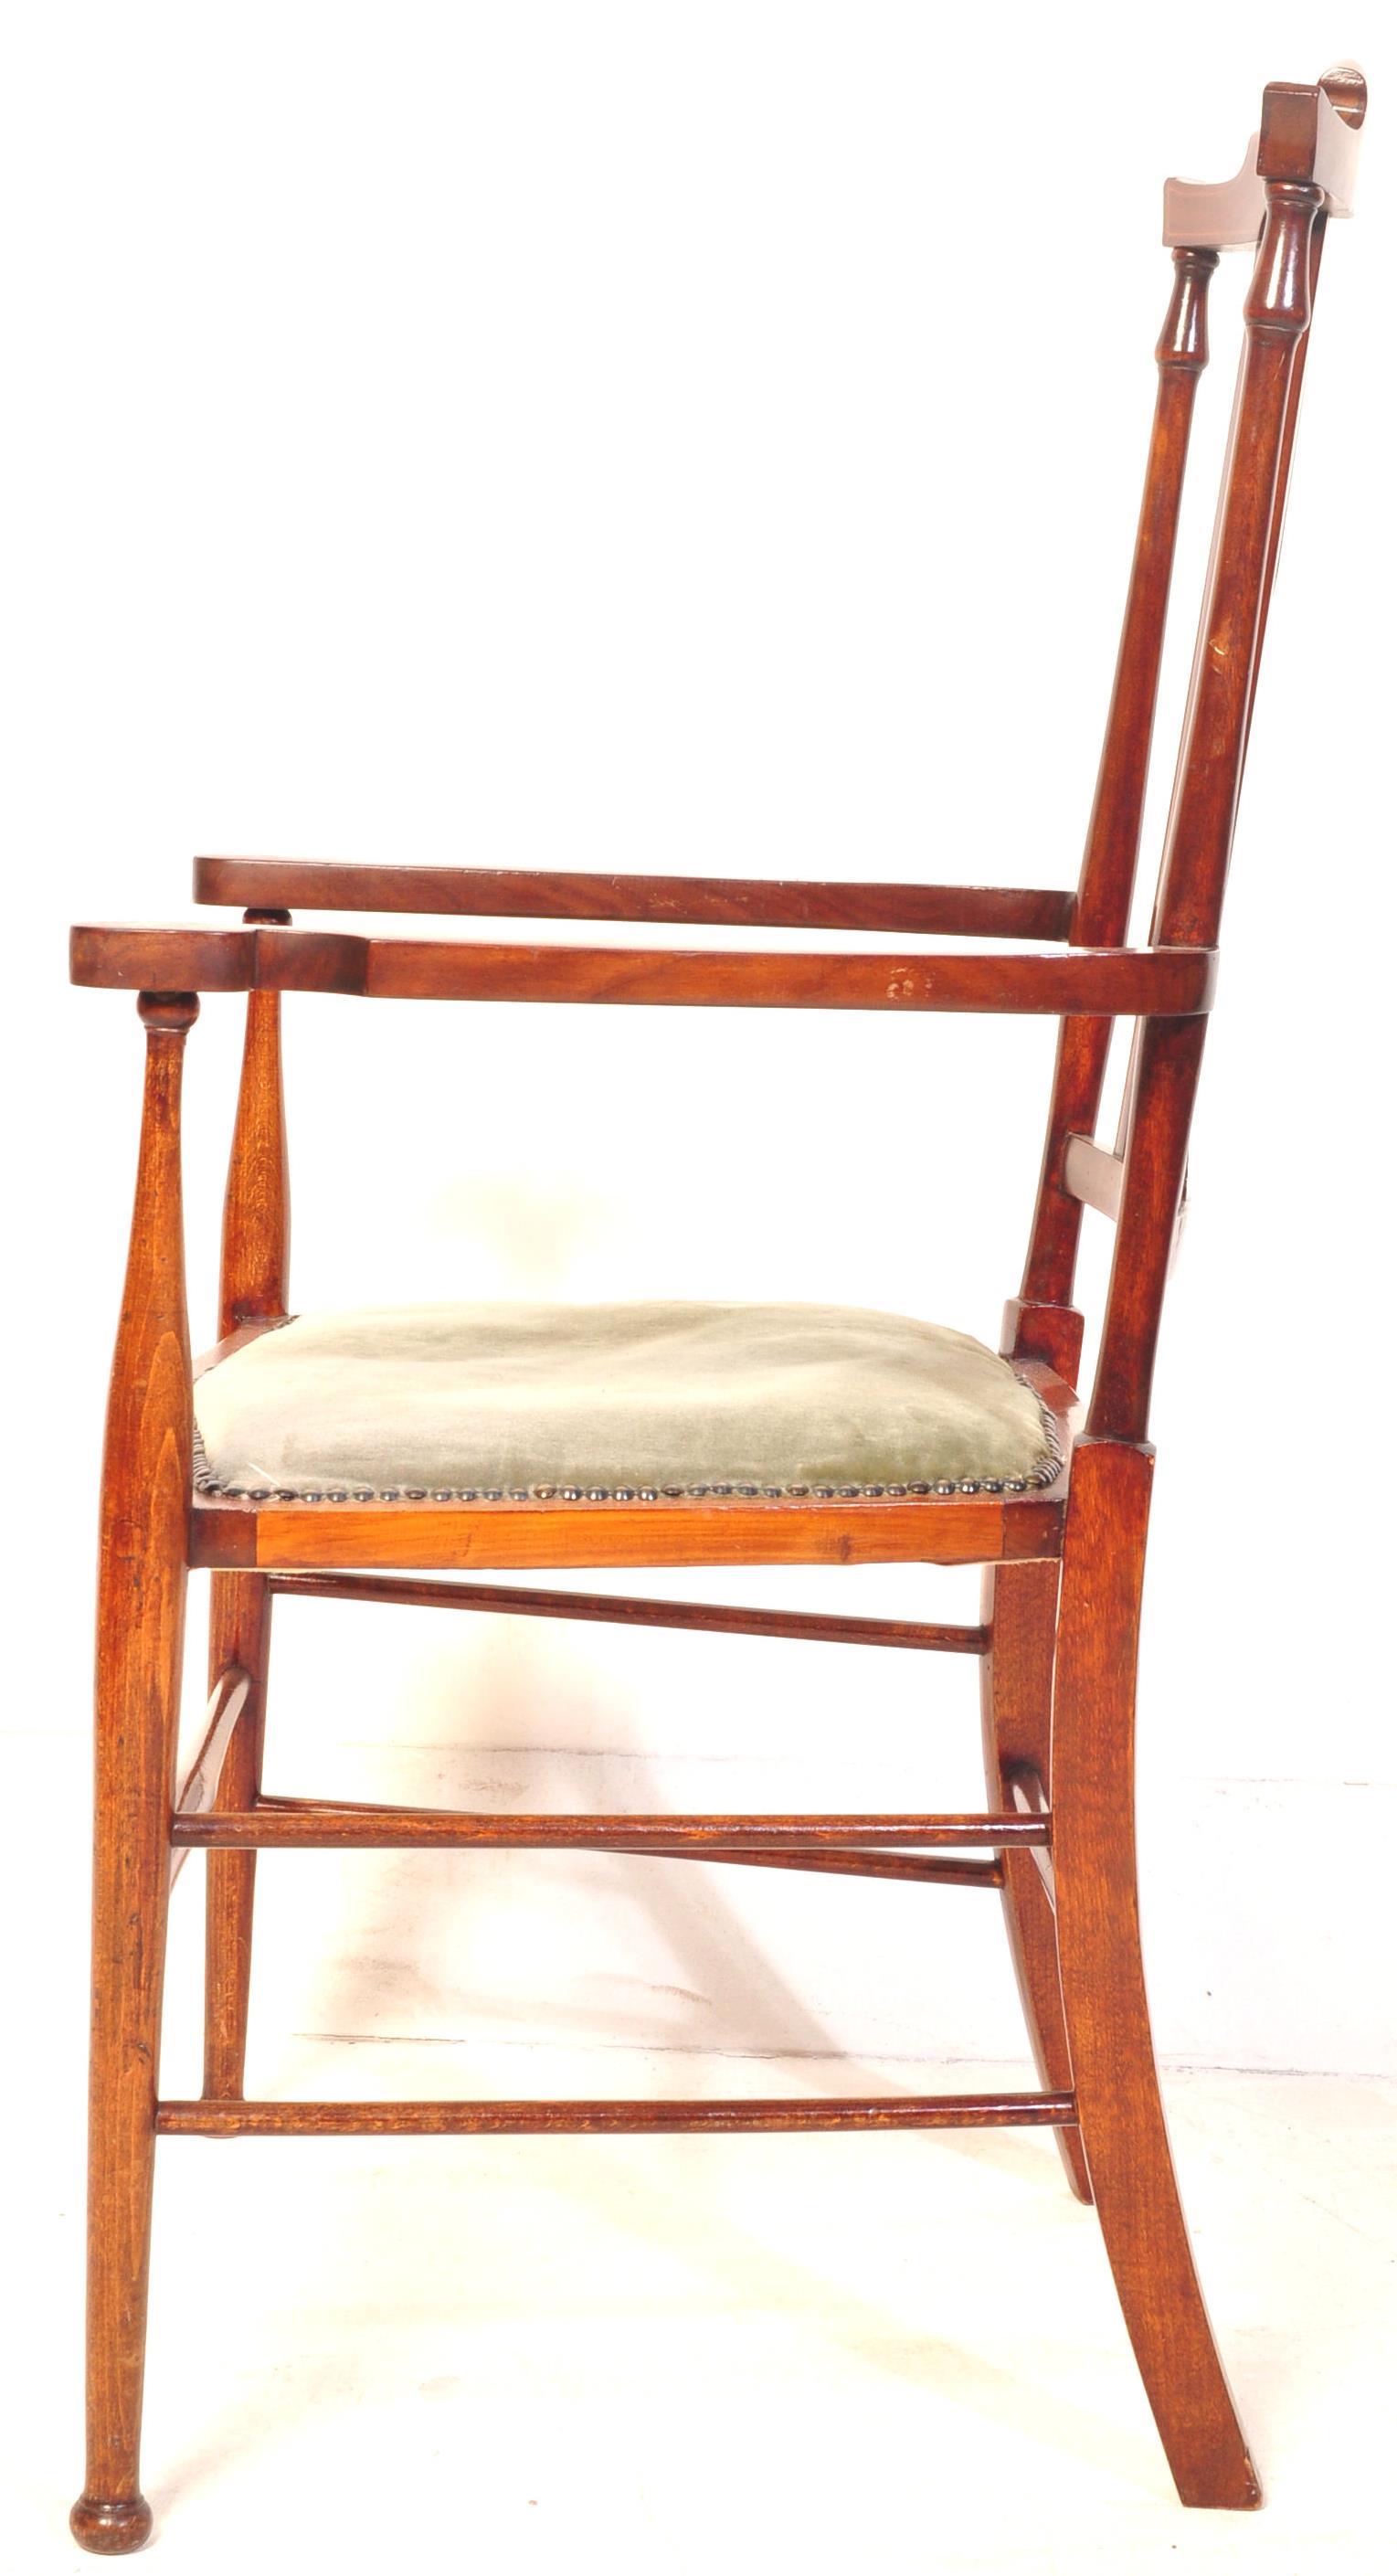 EDWARDIAN BEECH AND ELM CHAIR - Image 5 of 7